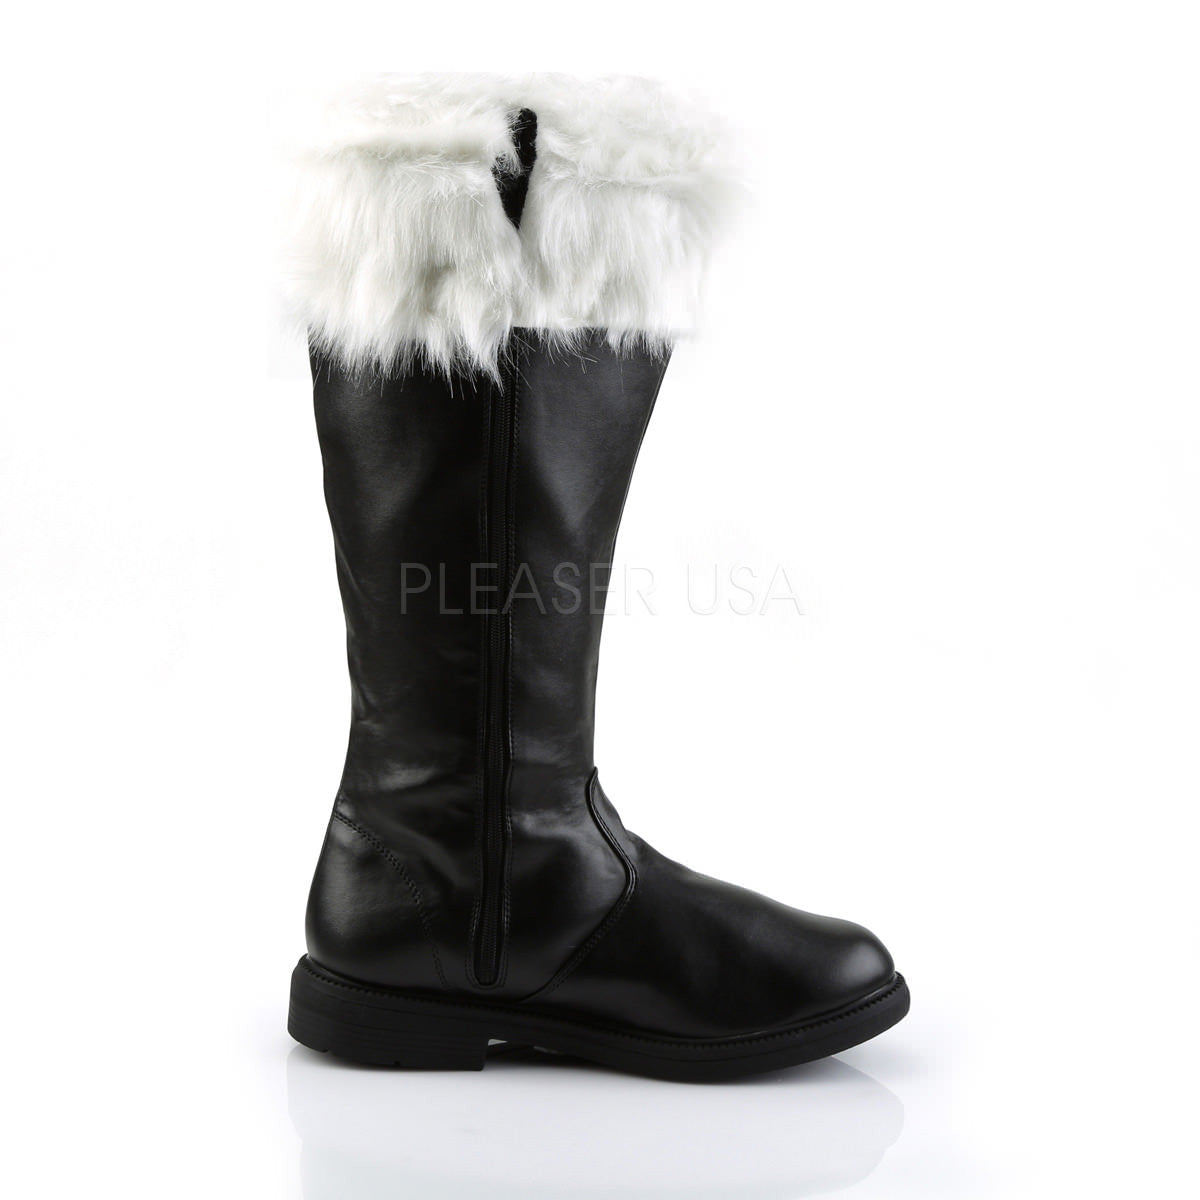 black boots with white fur trim